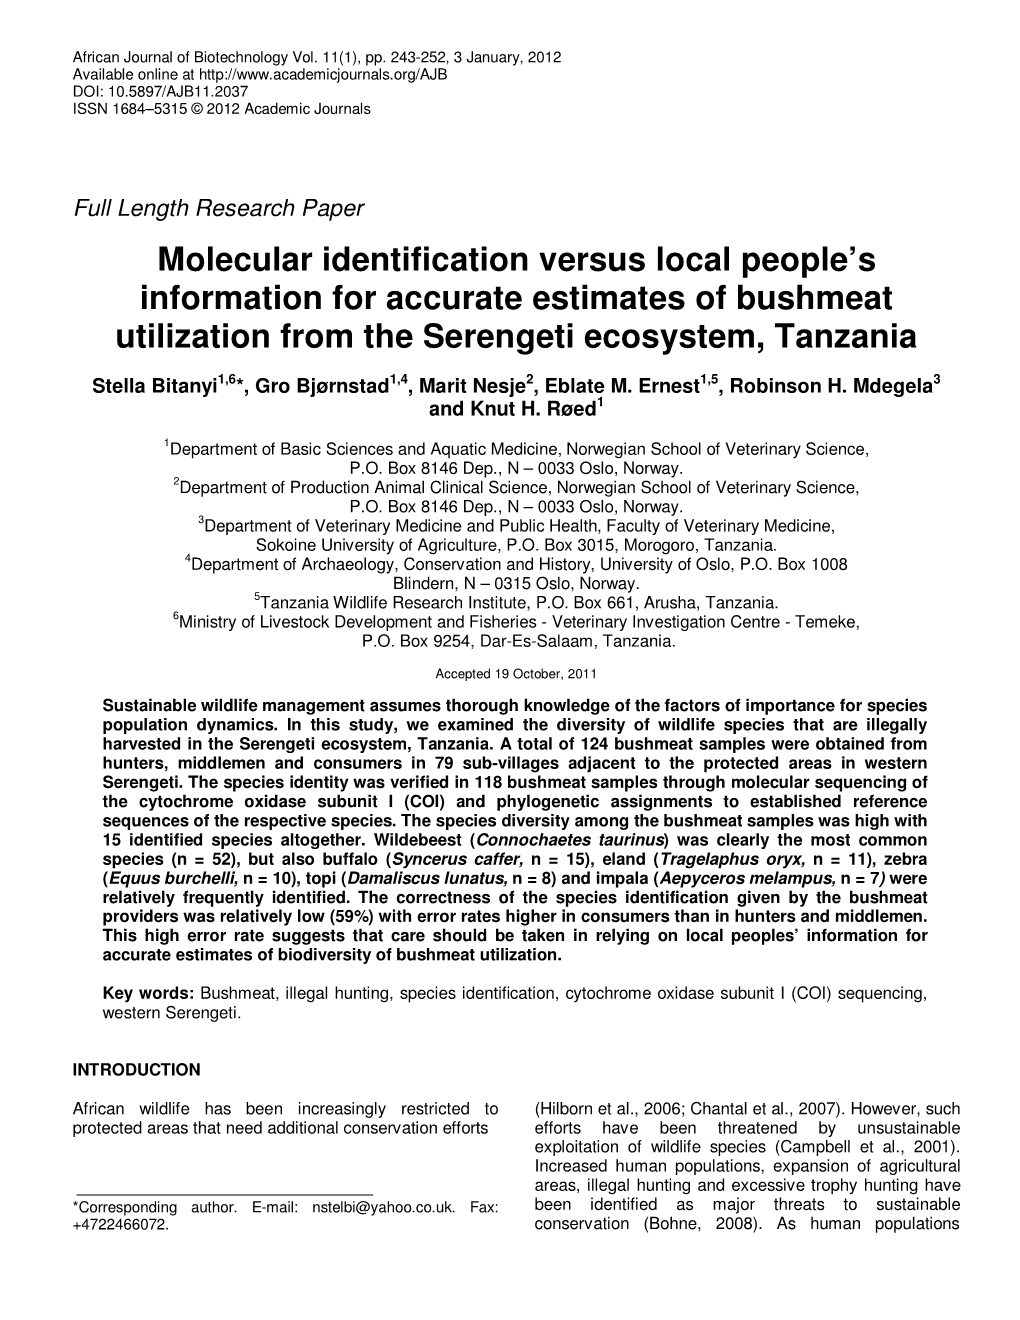 Molecular Identification Versus Local People's Information for Accurate